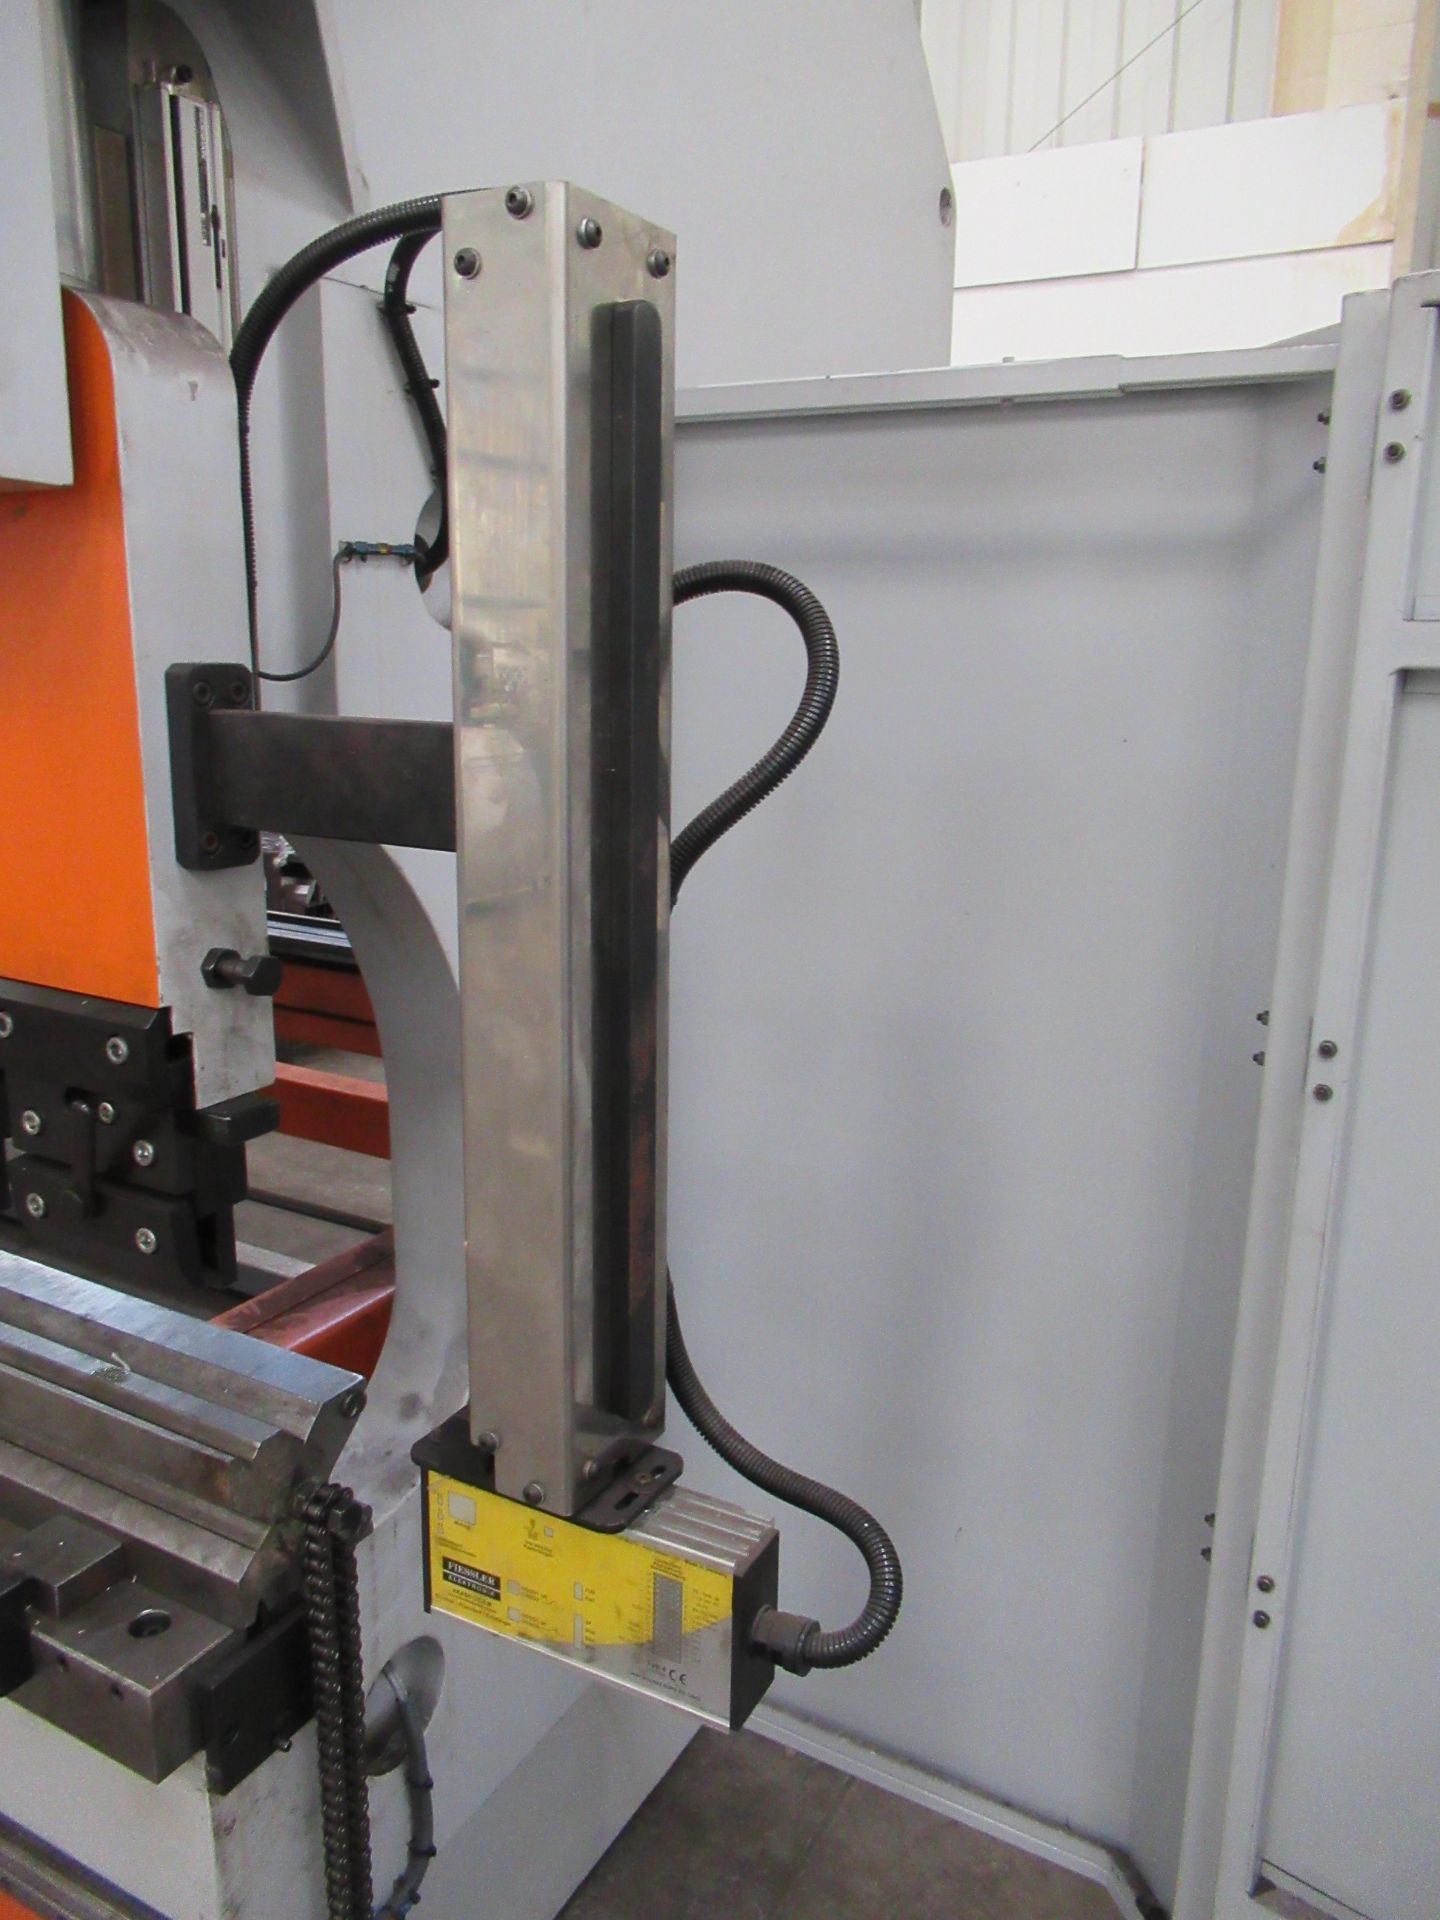 Ermaksan Speed-bend Pro 4100 x 220 CNC Hydraulic Press Brake and a selection of tooling for press br - Image 8 of 16